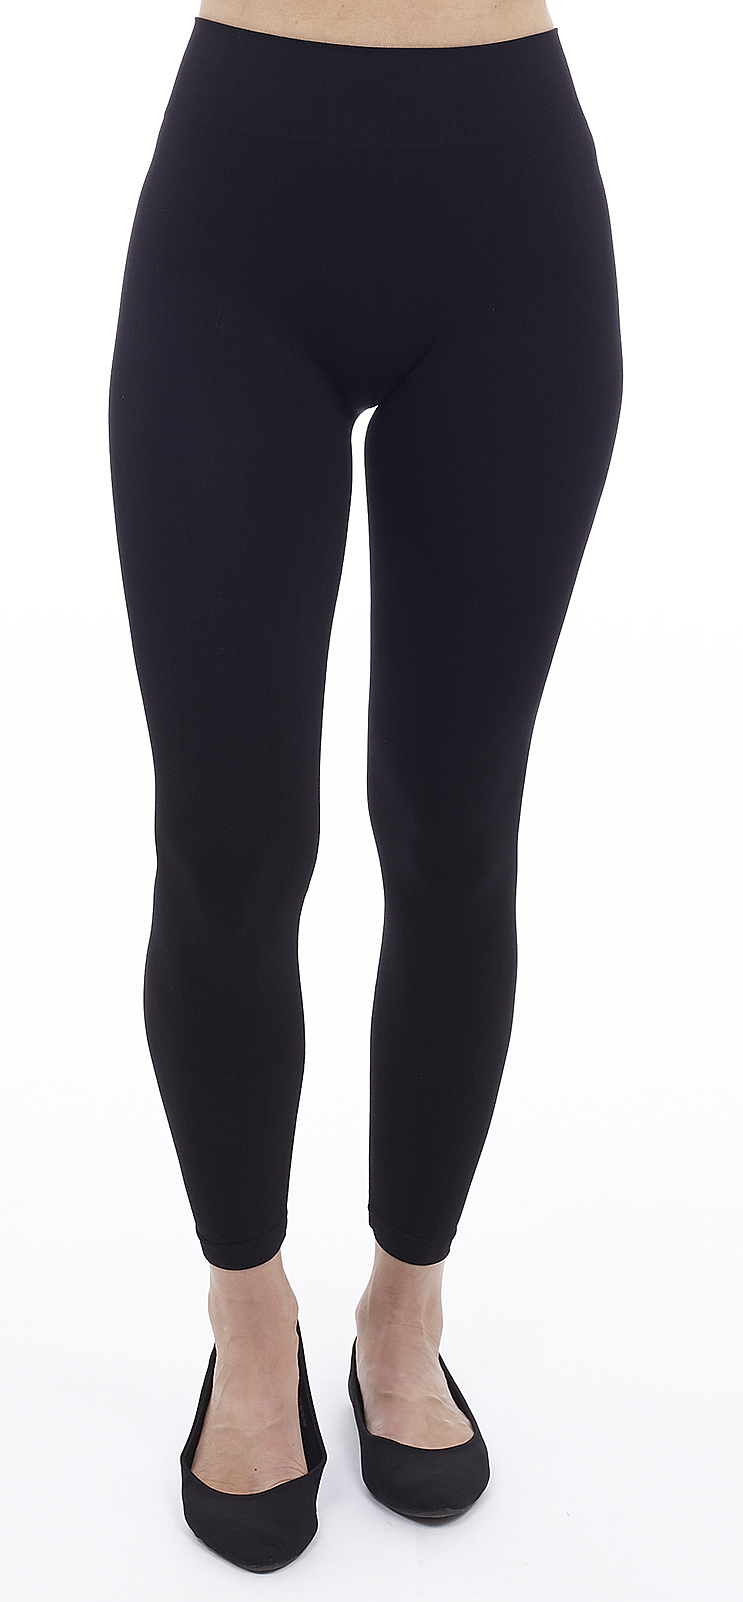 Purchase Wholesale wool leggings. Free Returns & Net 60 Terms on Faire